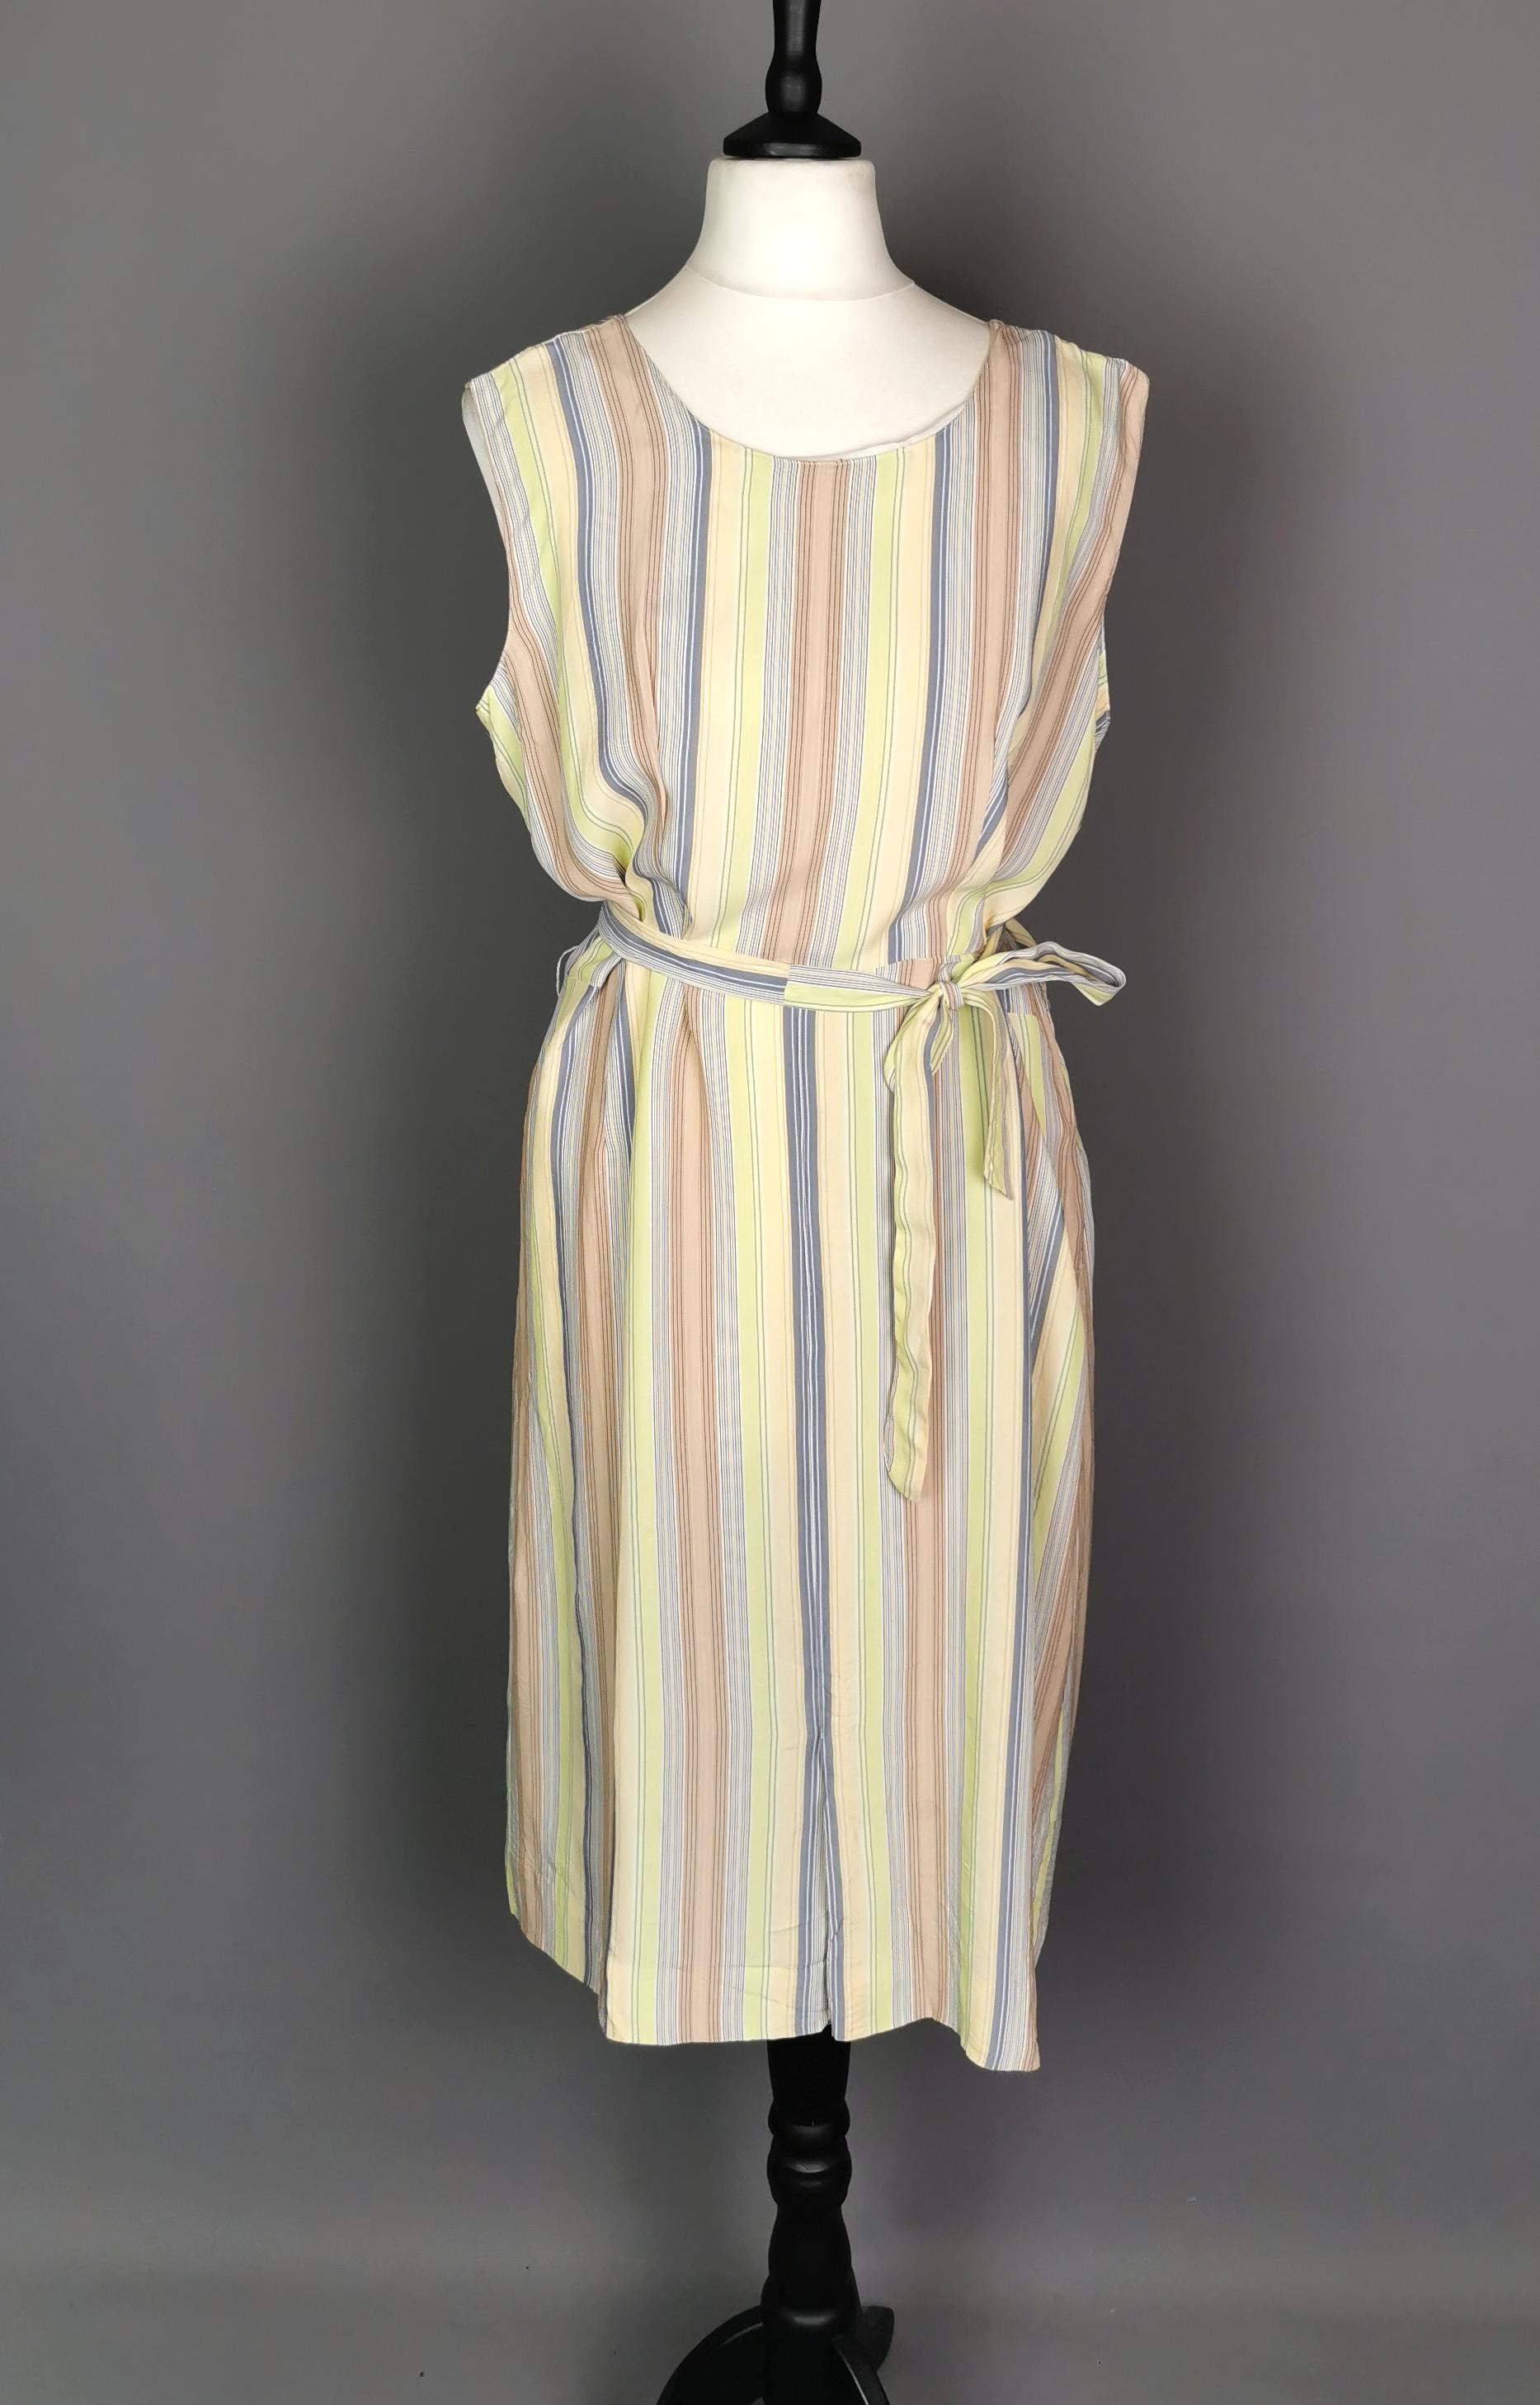 A sweet vintage c1930s striped day dress.

A lovely lightweight piece, late 1930's made from silky rayon with a stripe print.

The stripes are in greens, blues and browns on a light ground.

The dress is sleeveless with a round neckline and a